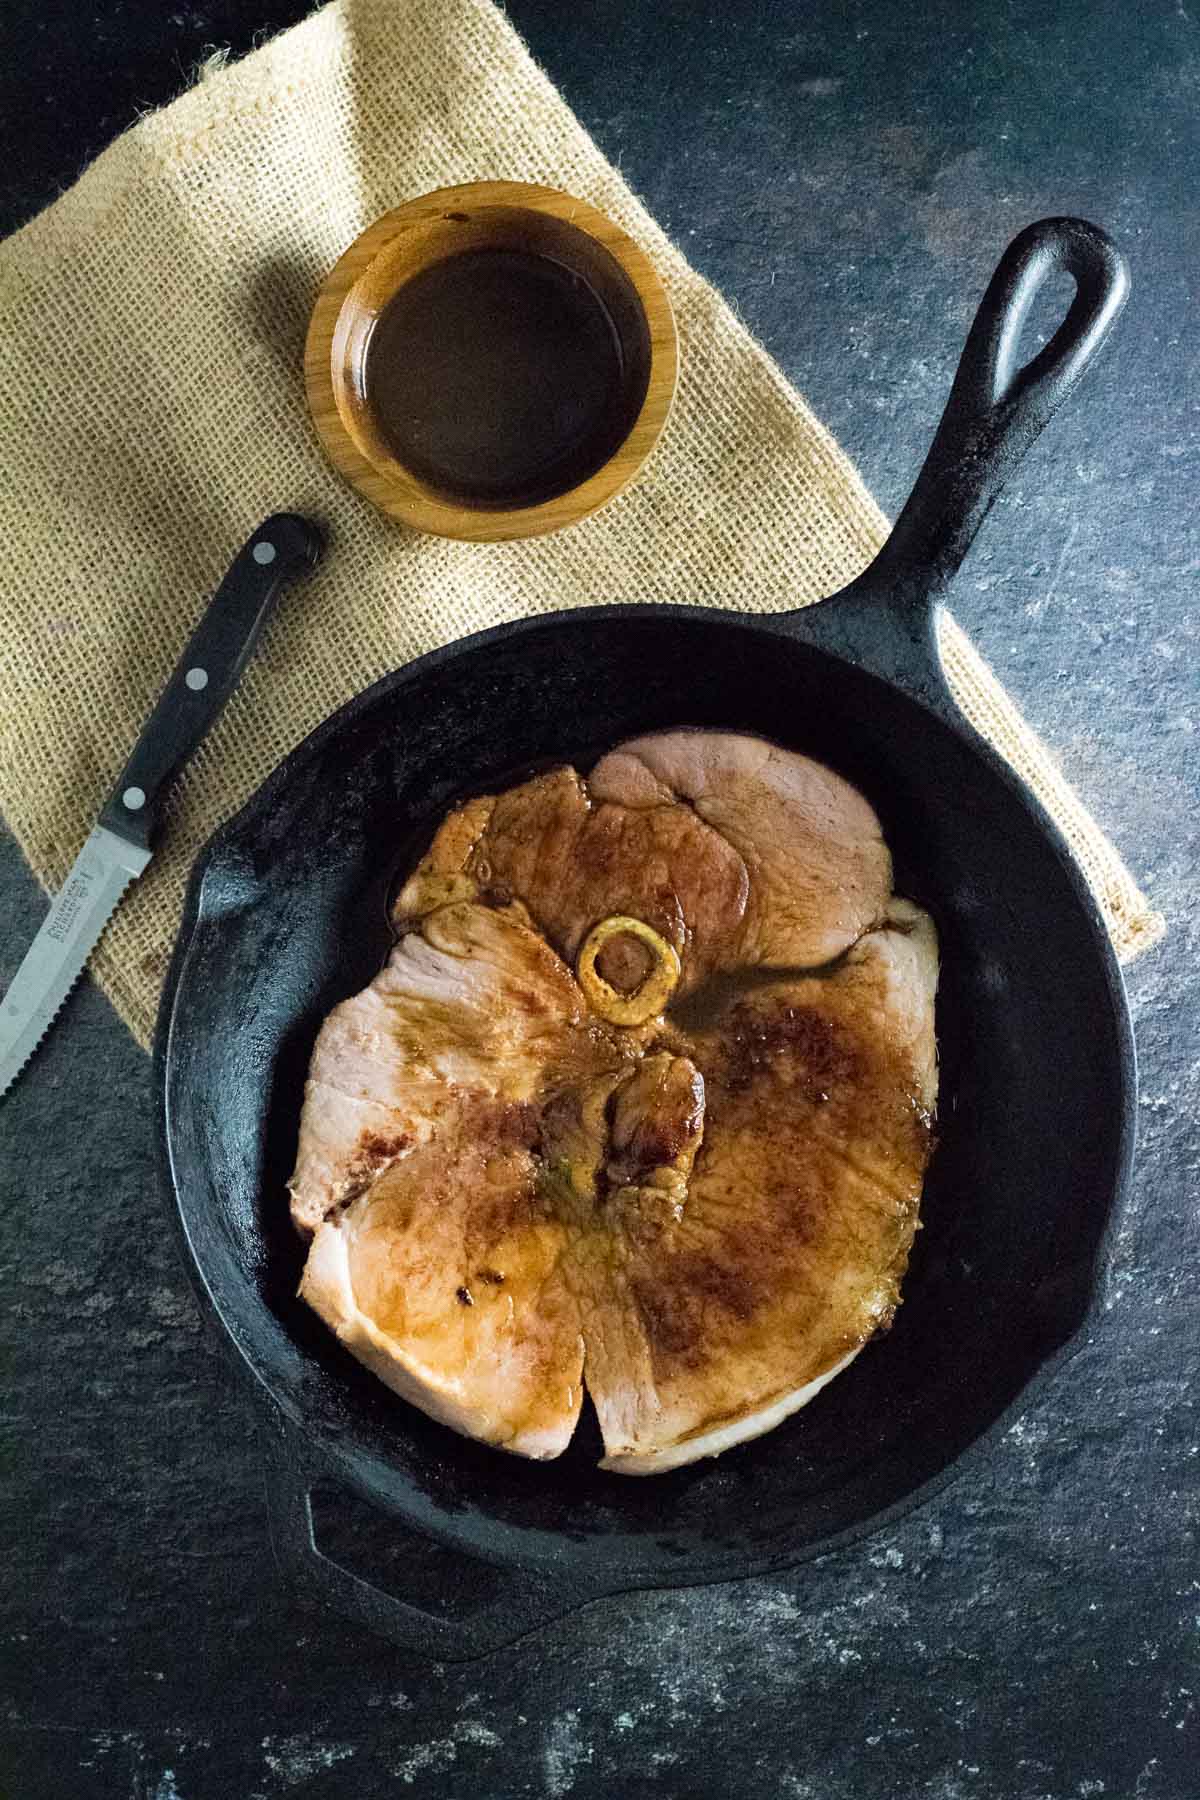 Red eye gravy with country ham.